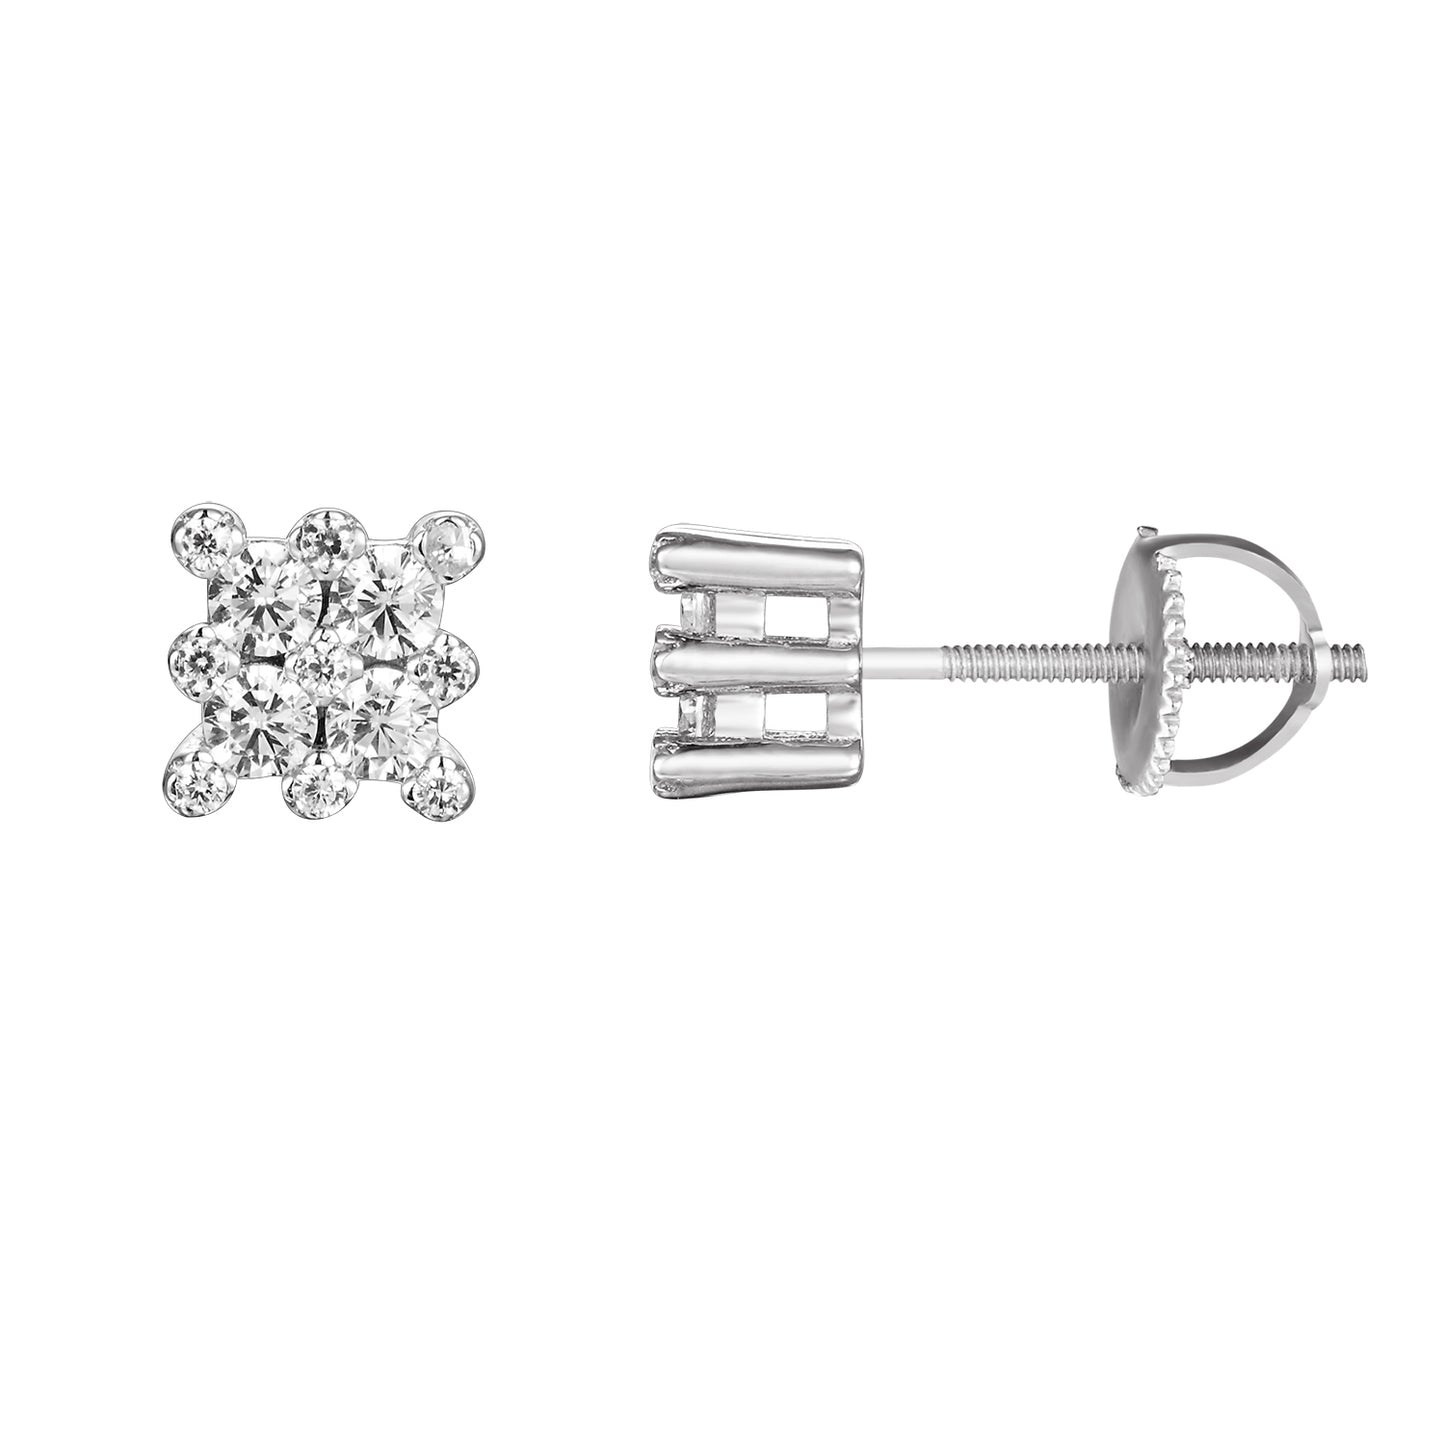 Silver Solitaire Prong Square Stud Screw Back Earrings